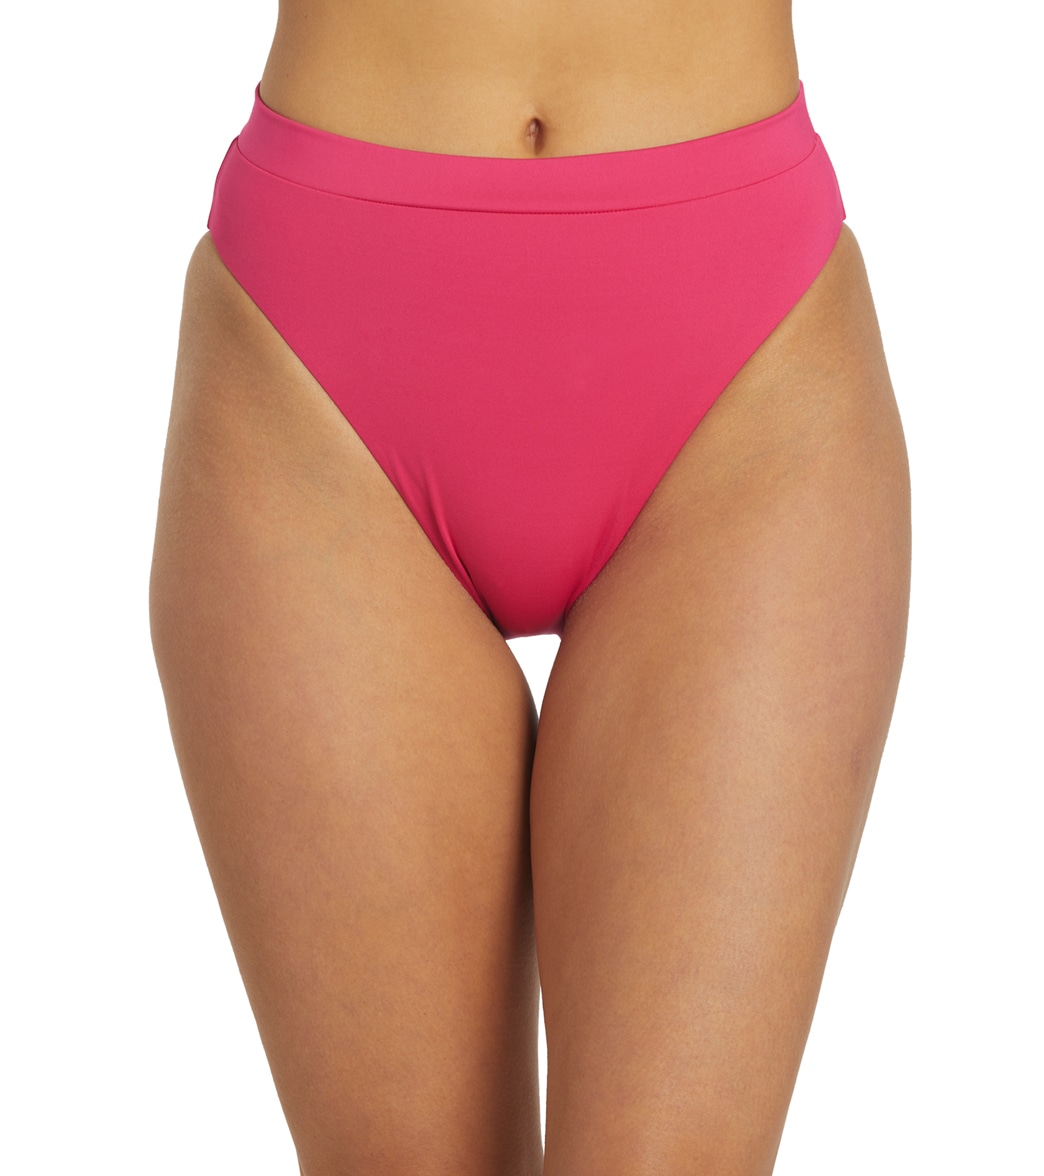 Nike Women's Essential High Waisted Bottom - Pink Prime Large - Swimoutlet.com